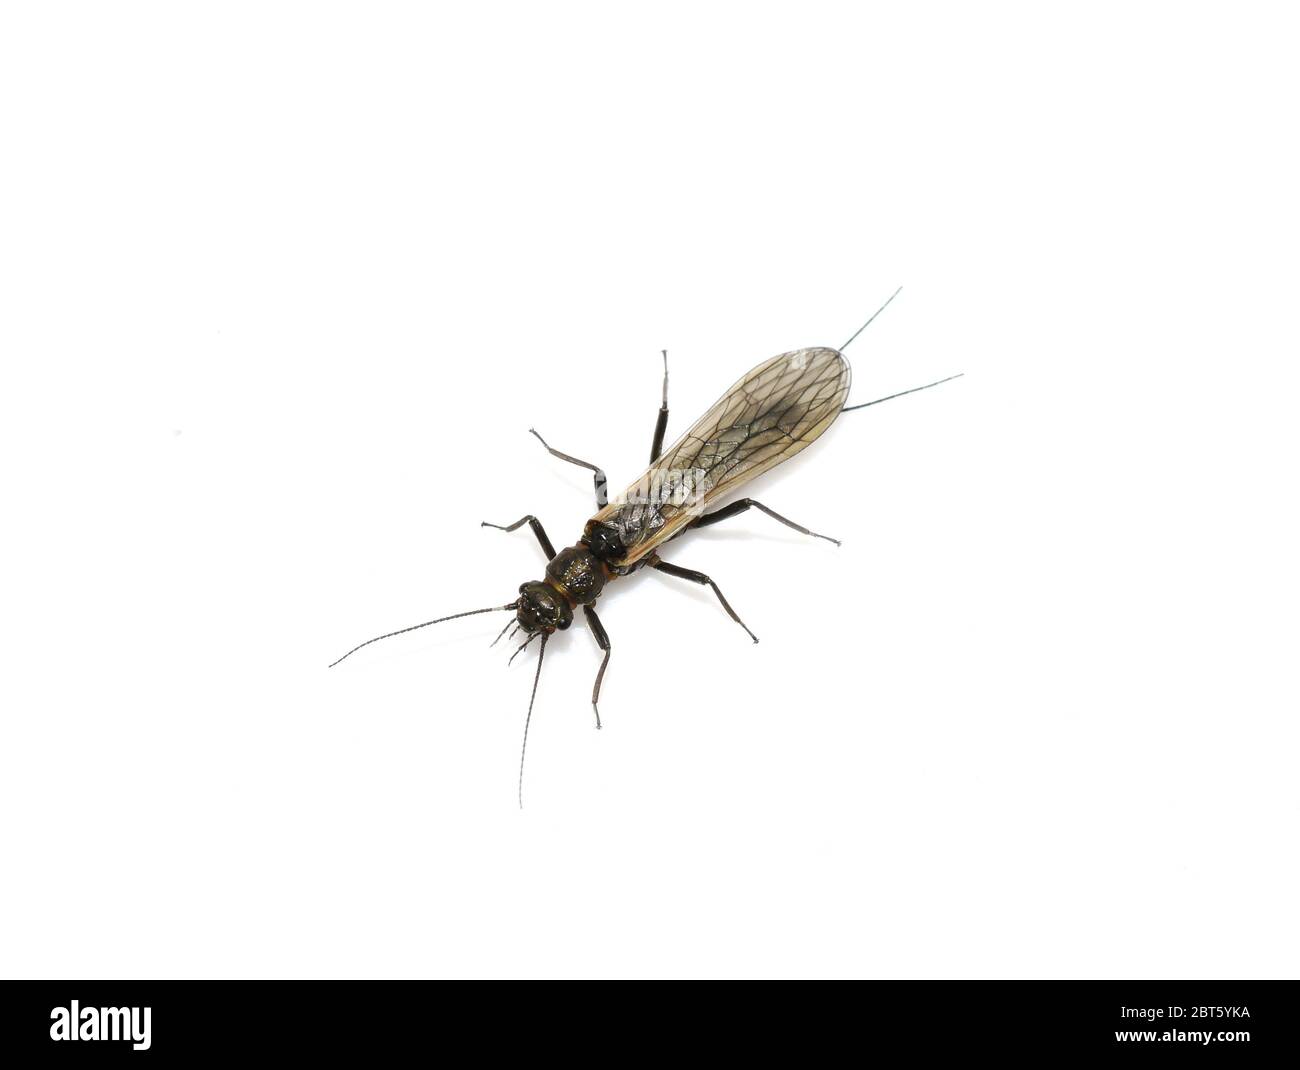 Stonefly plecoptera insect isolated on white background Stock Photo